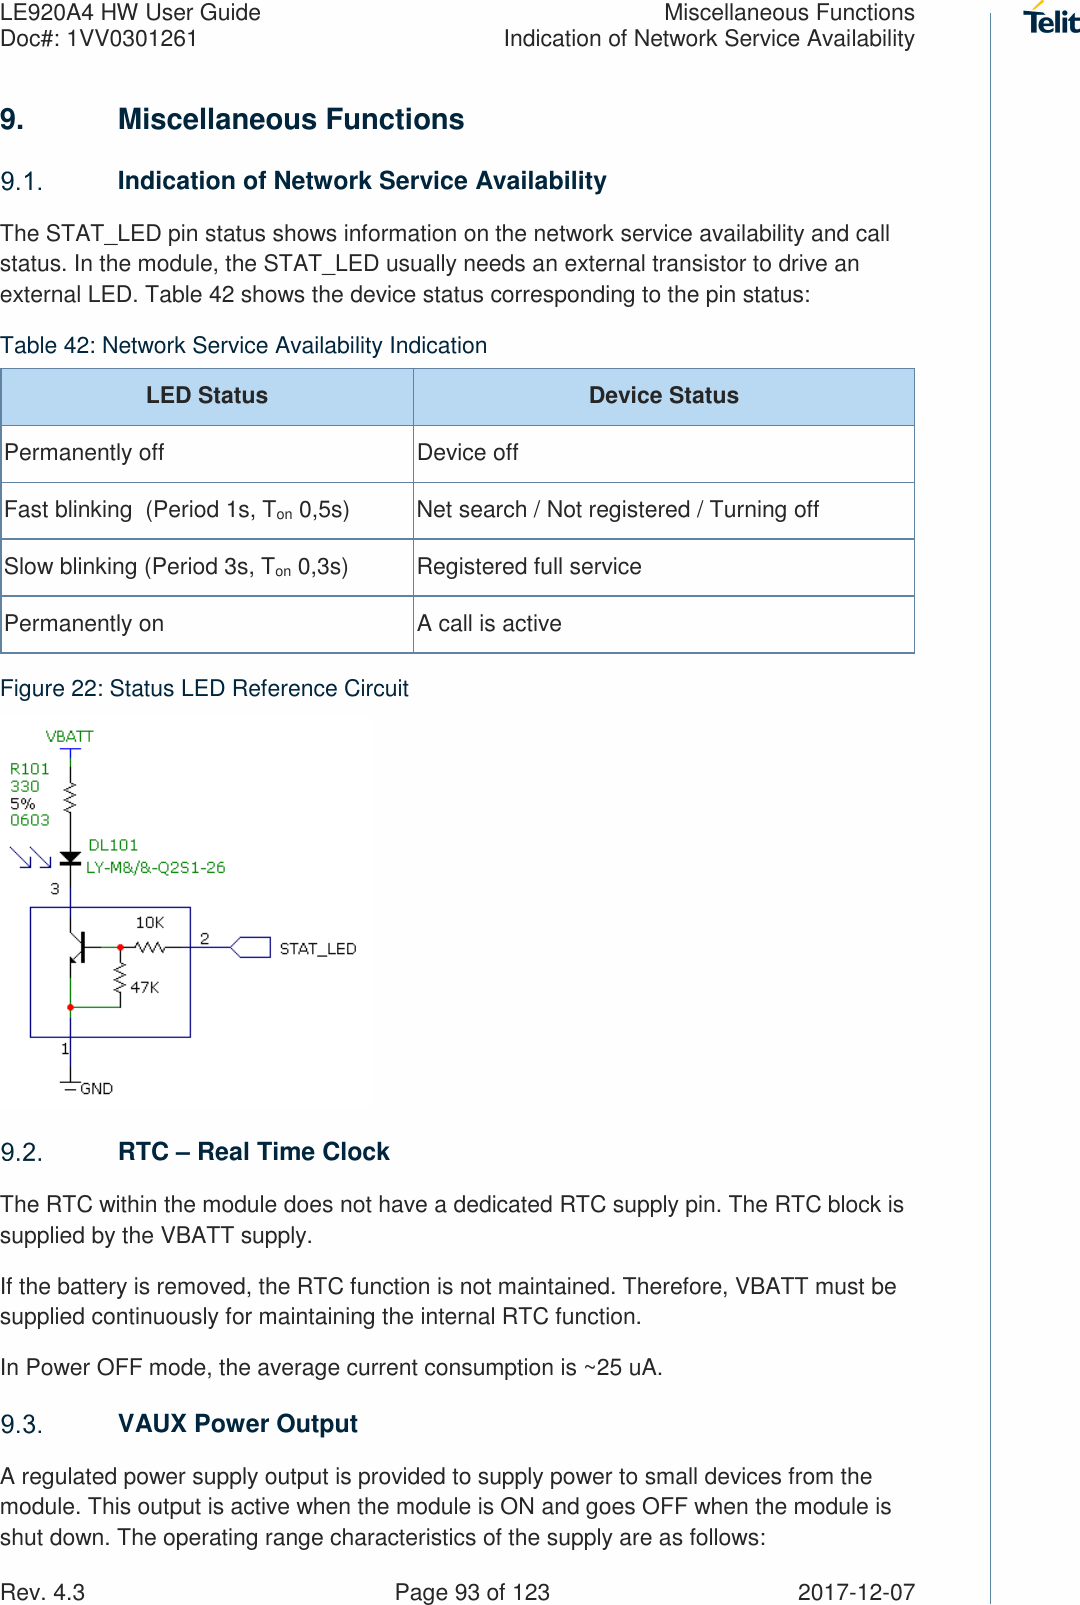 LE920A4 HW User Guide  Miscellaneous Functions Doc#: 1VV0301261  Indication of Network Service Availability Rev. 4.3    Page 93 of 123  2017-12-07 9.  Miscellaneous Functions  Indication of Network Service Availability The STAT_LED pin status shows information on the network service availability and call status. In the module, the STAT_LED usually needs an external transistor to drive an external LED. Table 42 shows the device status corresponding to the pin status: Table 42: Network Service Availability Indication LED Status  Device Status Permanently off  Device off Fast blinking  (Period 1s, Ton 0,5s)  Net search / Not registered / Turning off Slow blinking (Period 3s, Ton 0,3s)  Registered full service Permanently on  A call is active Figure 22: Status LED Reference Circuit    RTC – Real Time Clock The RTC within the module does not have a dedicated RTC supply pin. The RTC block is supplied by the VBATT supply. If the battery is removed, the RTC function is not maintained. Therefore, VBATT must be supplied continuously for maintaining the internal RTC function. In Power OFF mode, the average current consumption is ~25 uA.  VAUX Power Output A regulated power supply output is provided to supply power to small devices from the module. This output is active when the module is ON and goes OFF when the module is shut down. The operating range characteristics of the supply are as follows: 